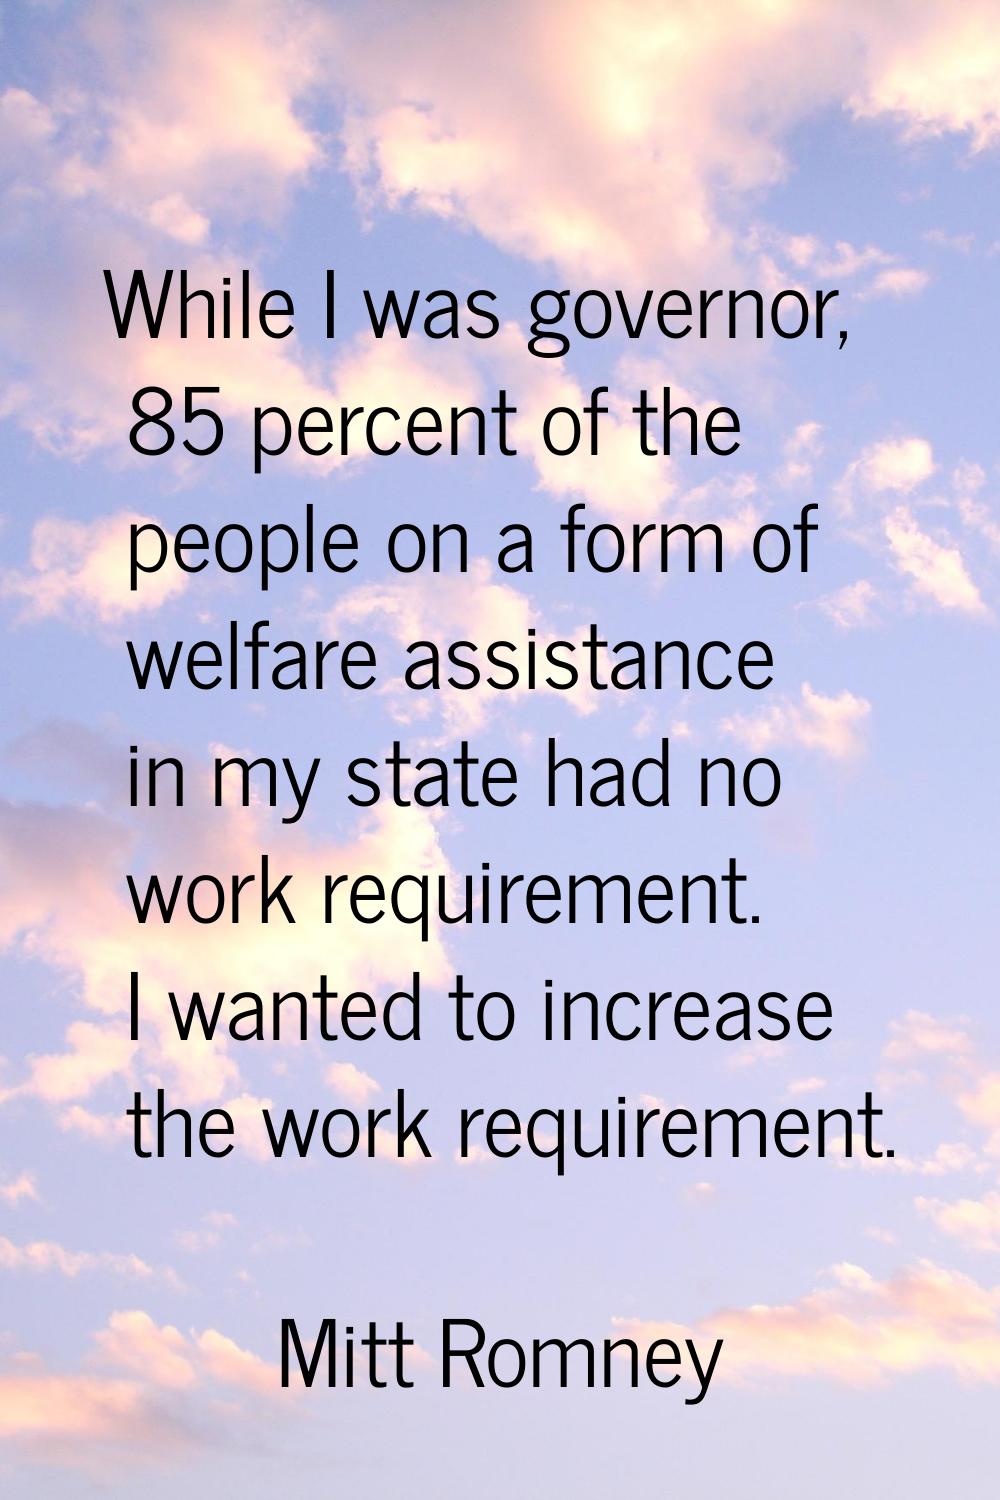 While I was governor, 85 percent of the people on a form of welfare assistance in my state had no w